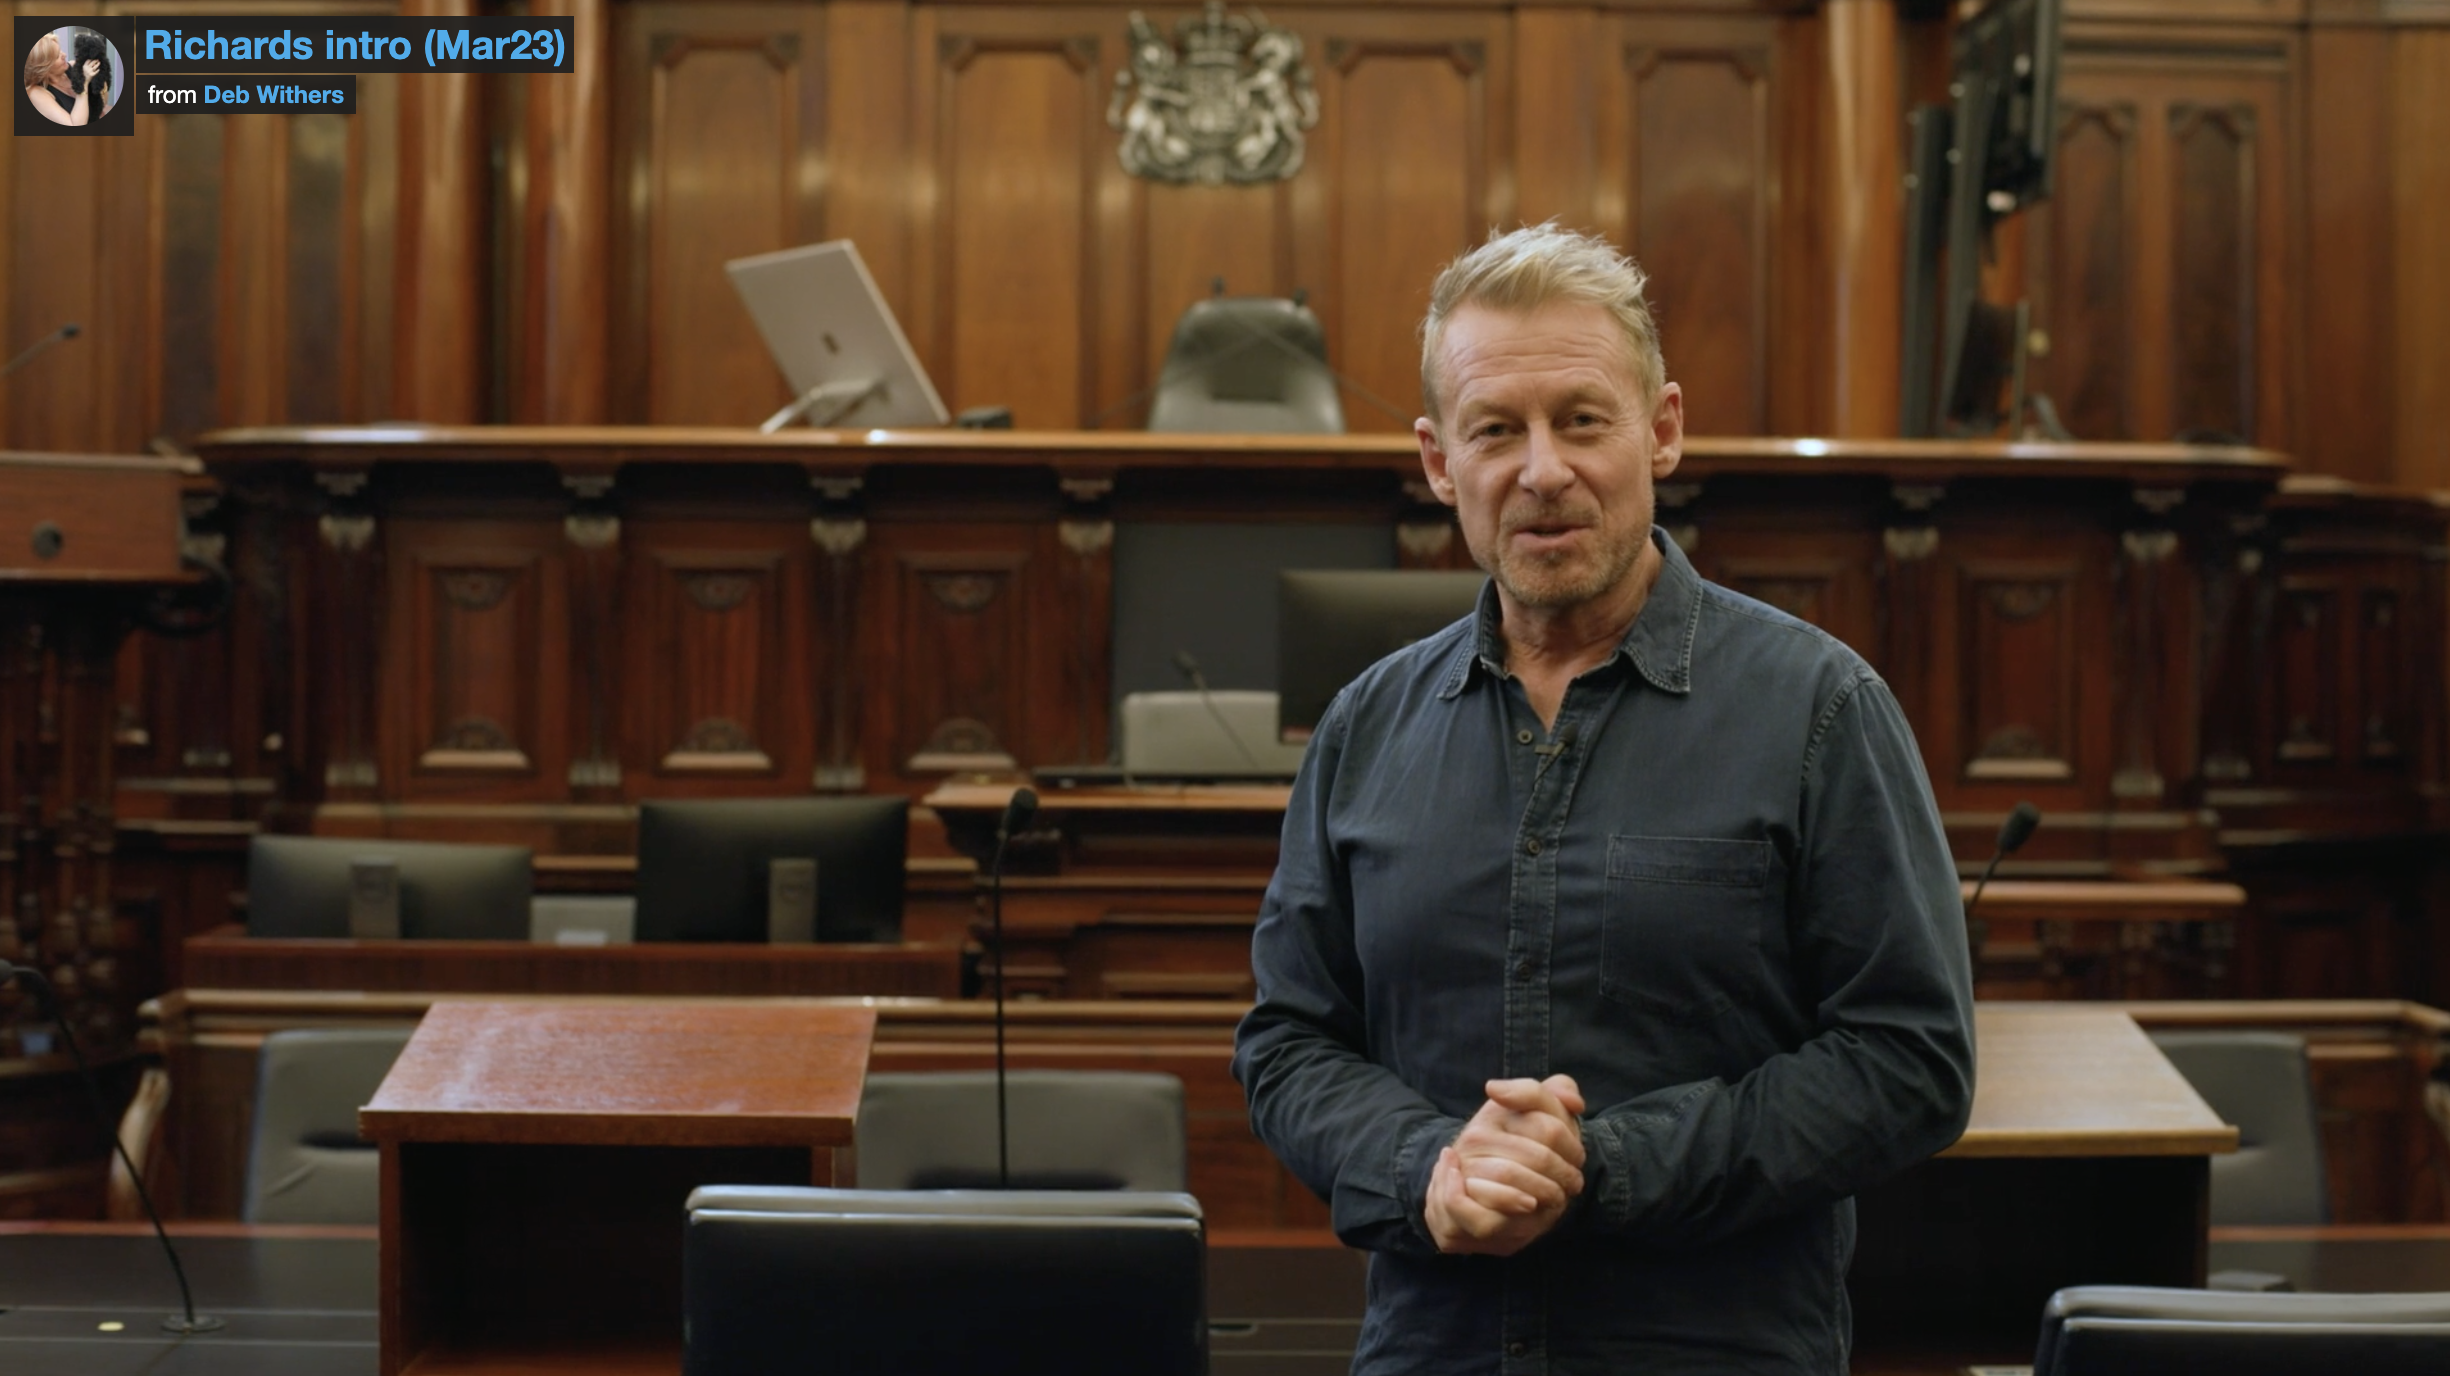 An introduction from Richard Roxburgh